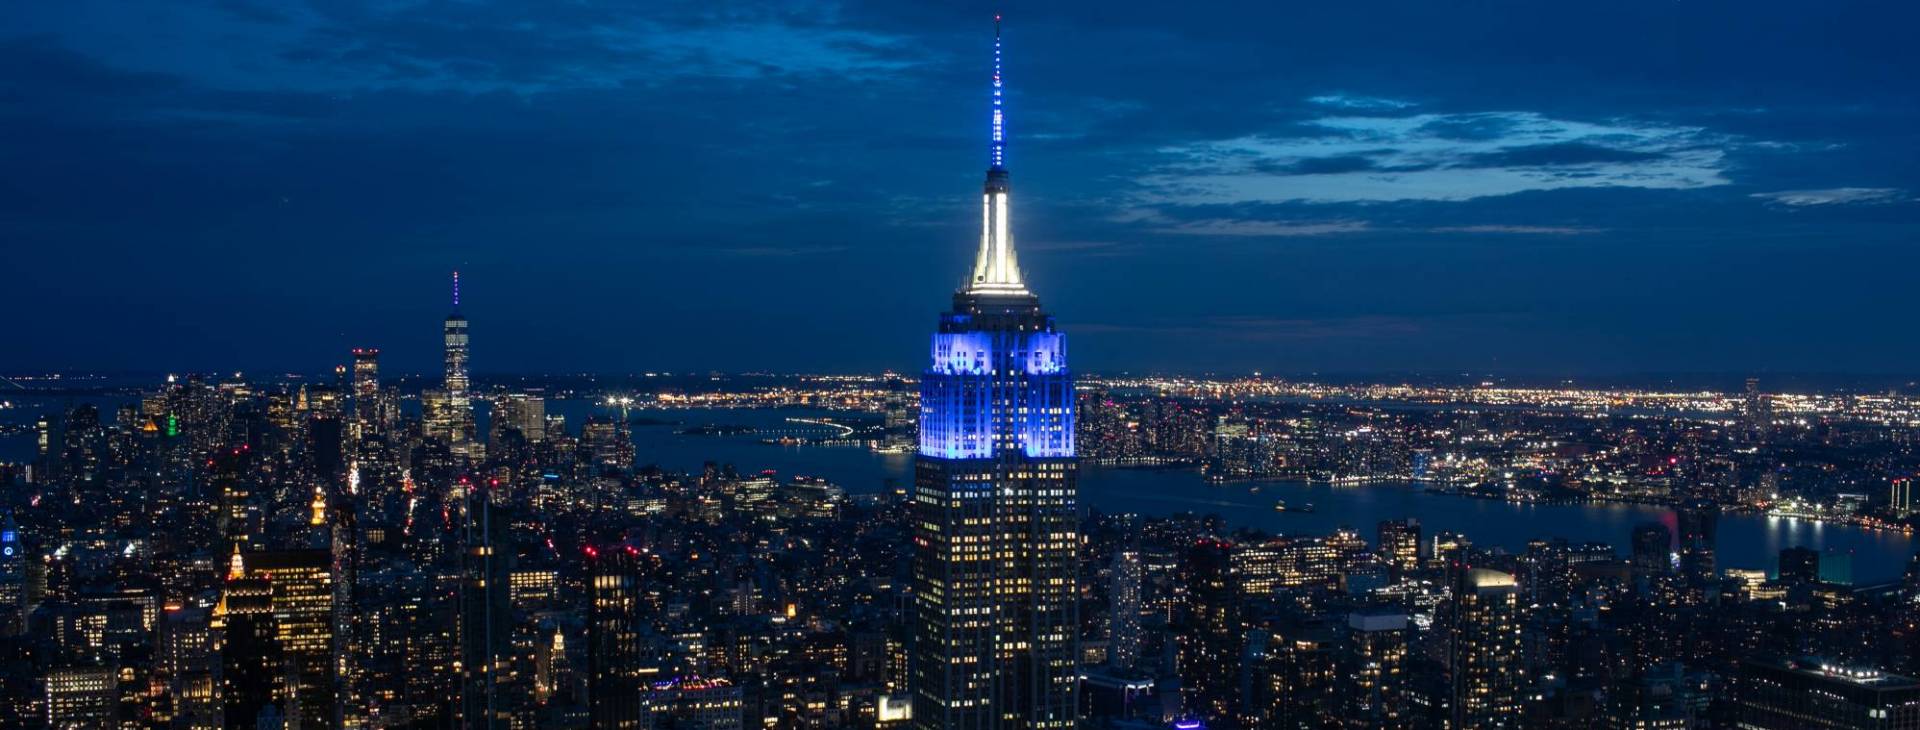 The empire state building lighting up blue for Columbian graduates.